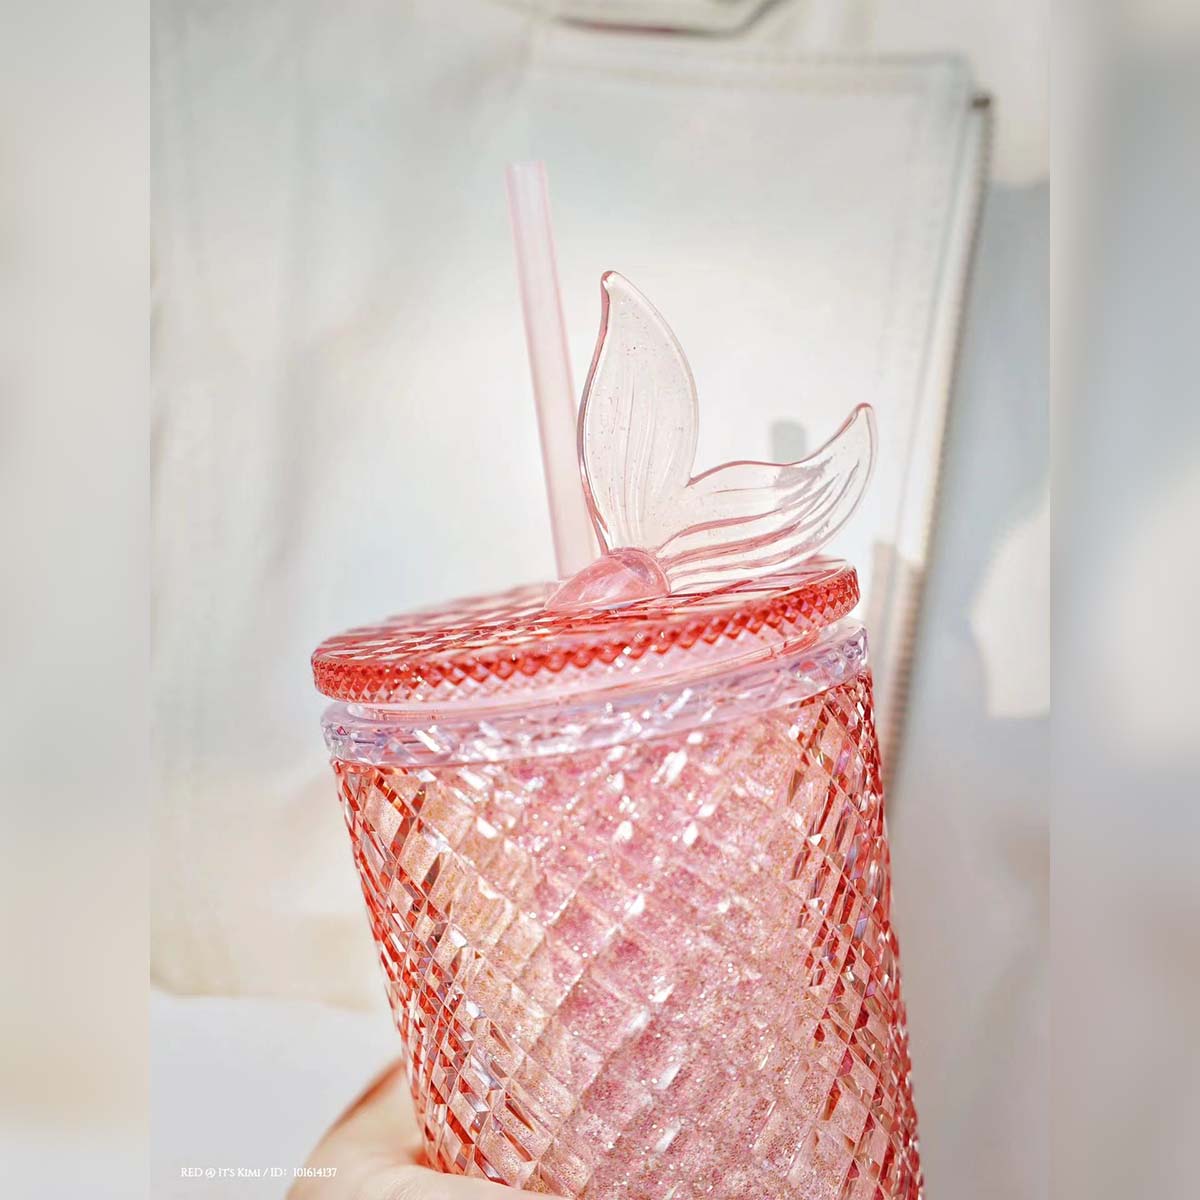 US$ 49.99 - Starbucks 2023 US&CAN Pink Marble 24oz Tumbler In Hand Ship  Soon - m.